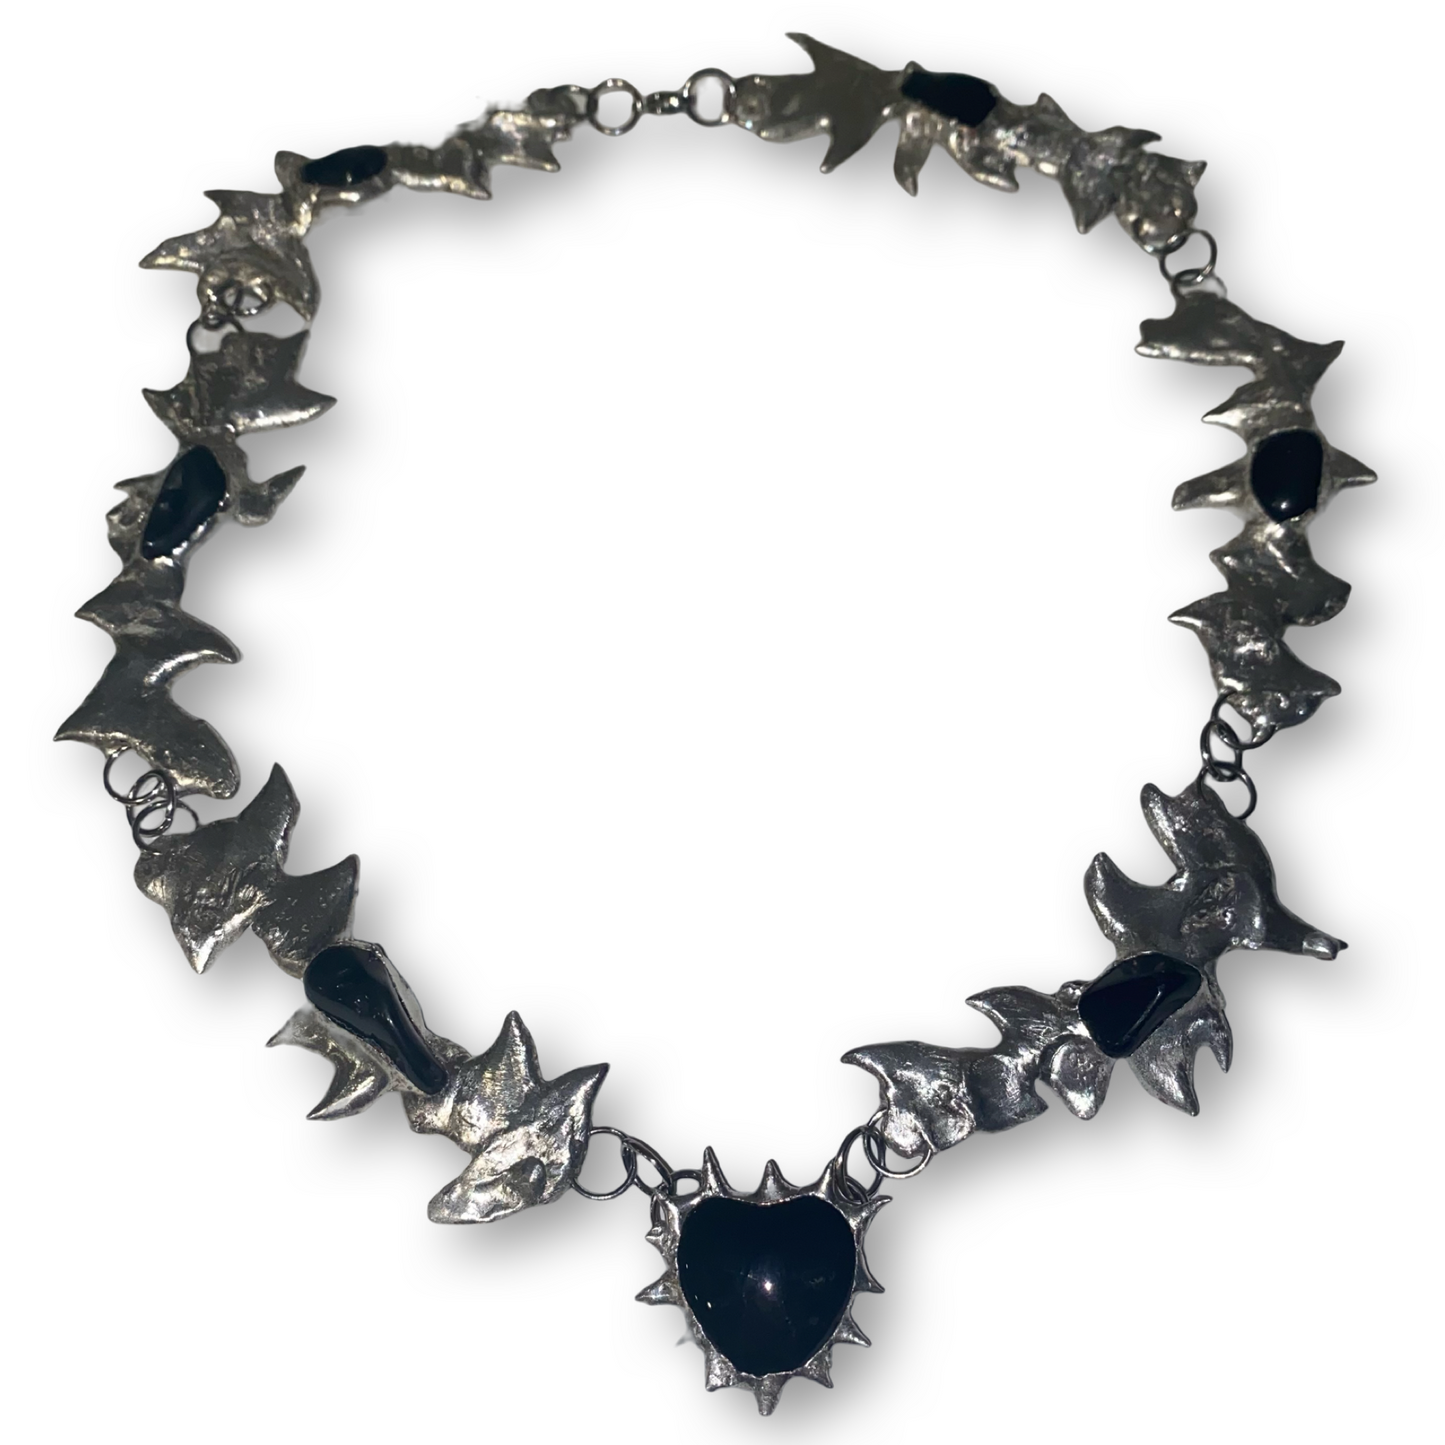 The Obsidian Heart Necklace